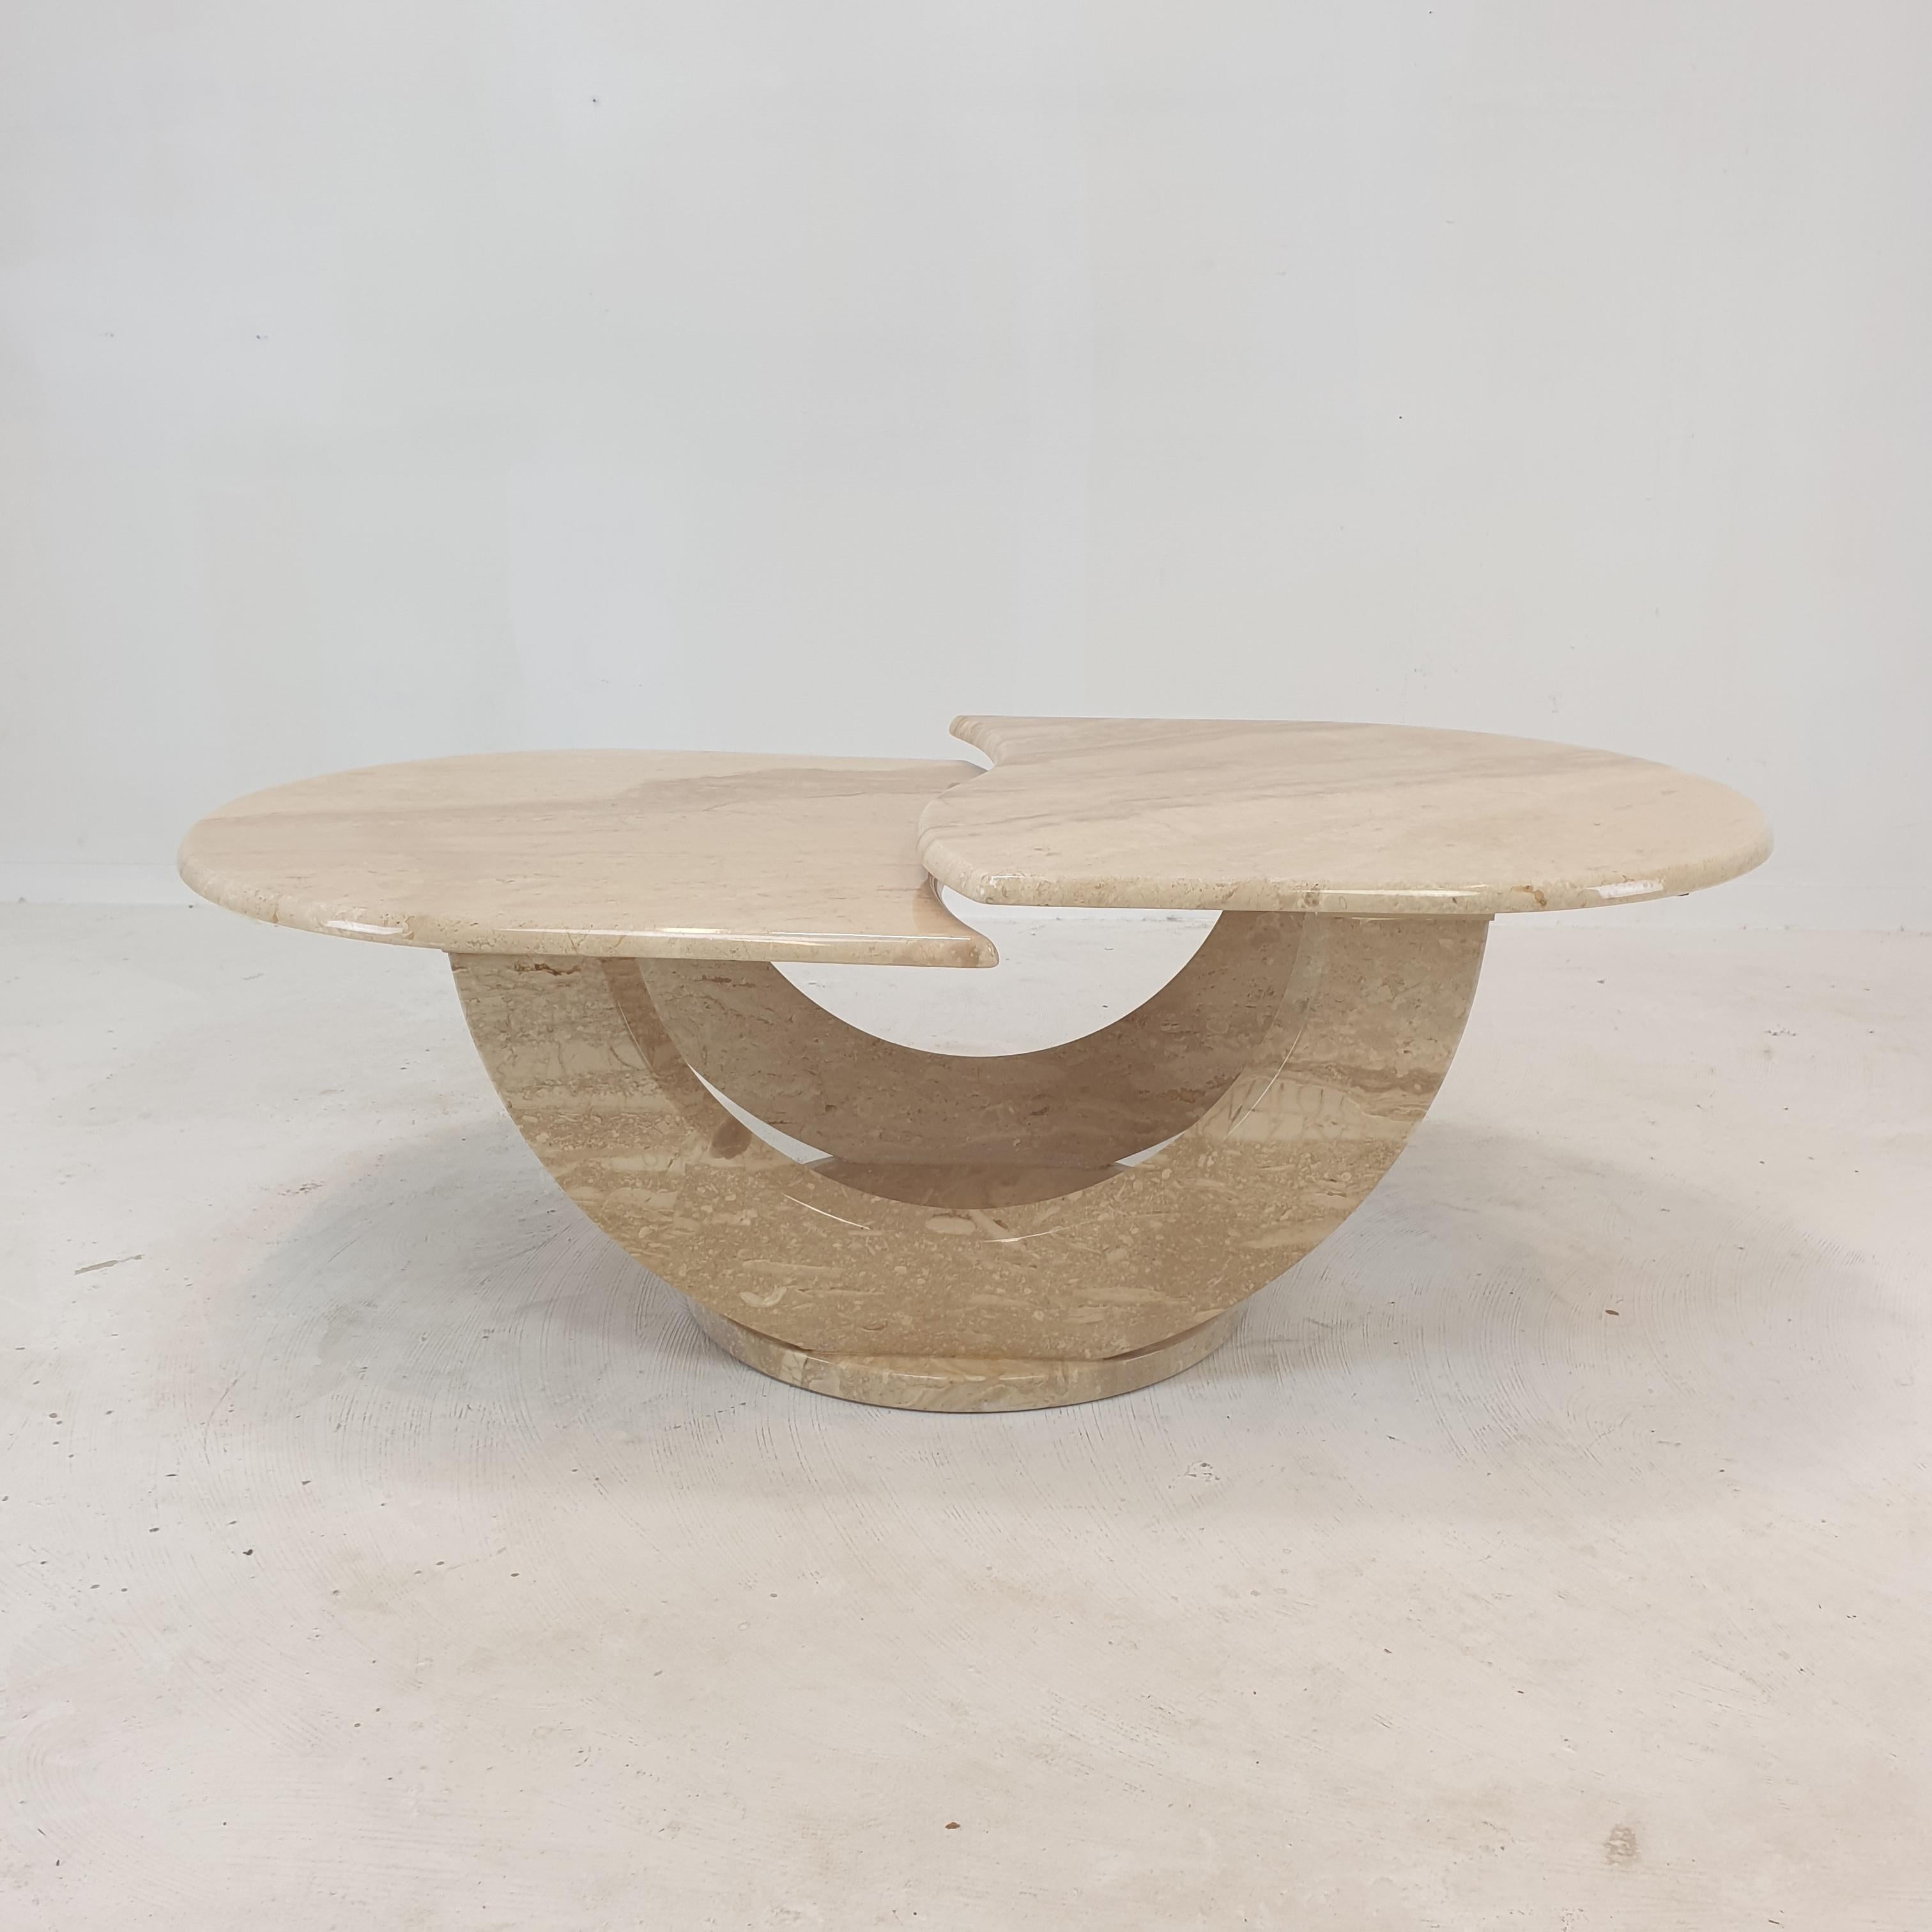 Very nice and rare Italian coffee table, fabricated in the 80's. 

Two beautiful shaped plates on a very elegant base. 
The plates are rounded on the edge. 

This lovely table is made of beautiful travertine.

We work with professional